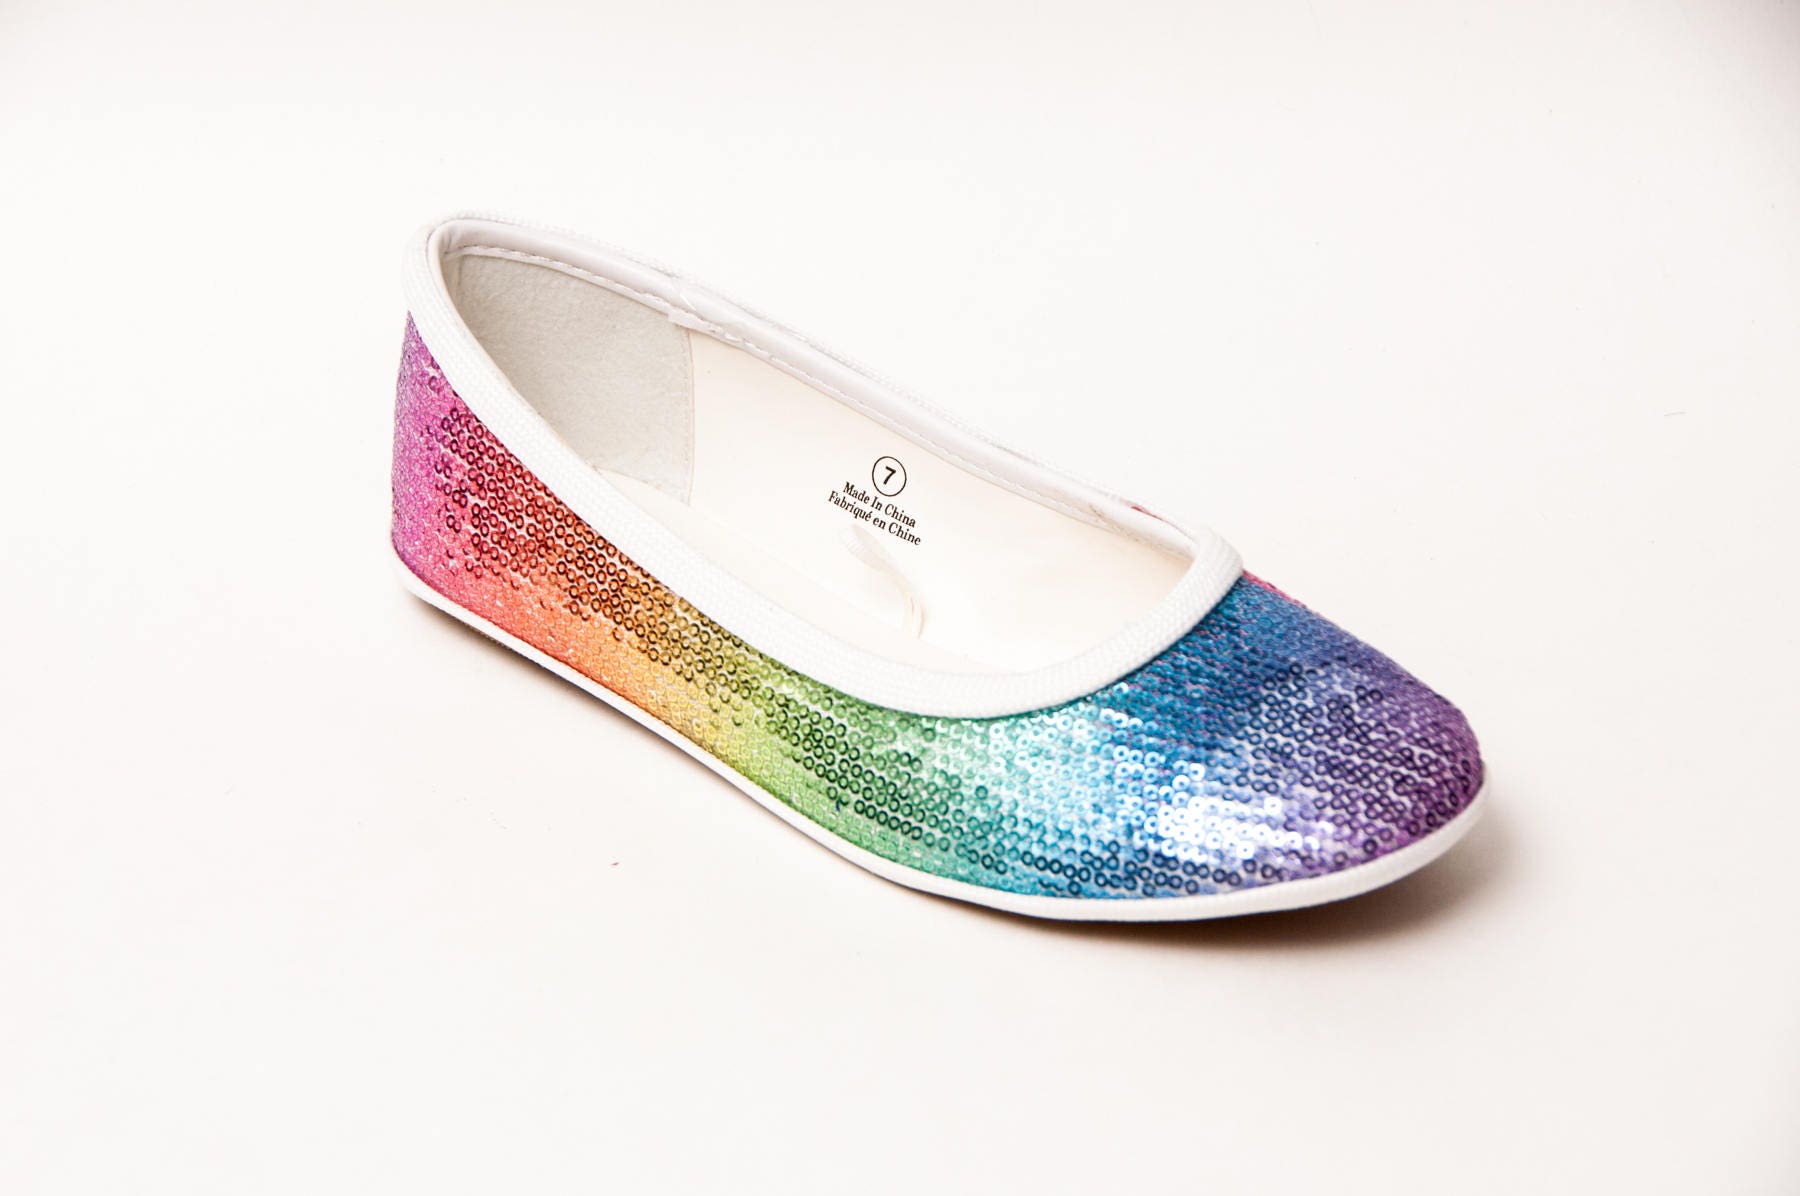 Sequin Rainbow Patterned Ballet Flats Slippers Casual Dress